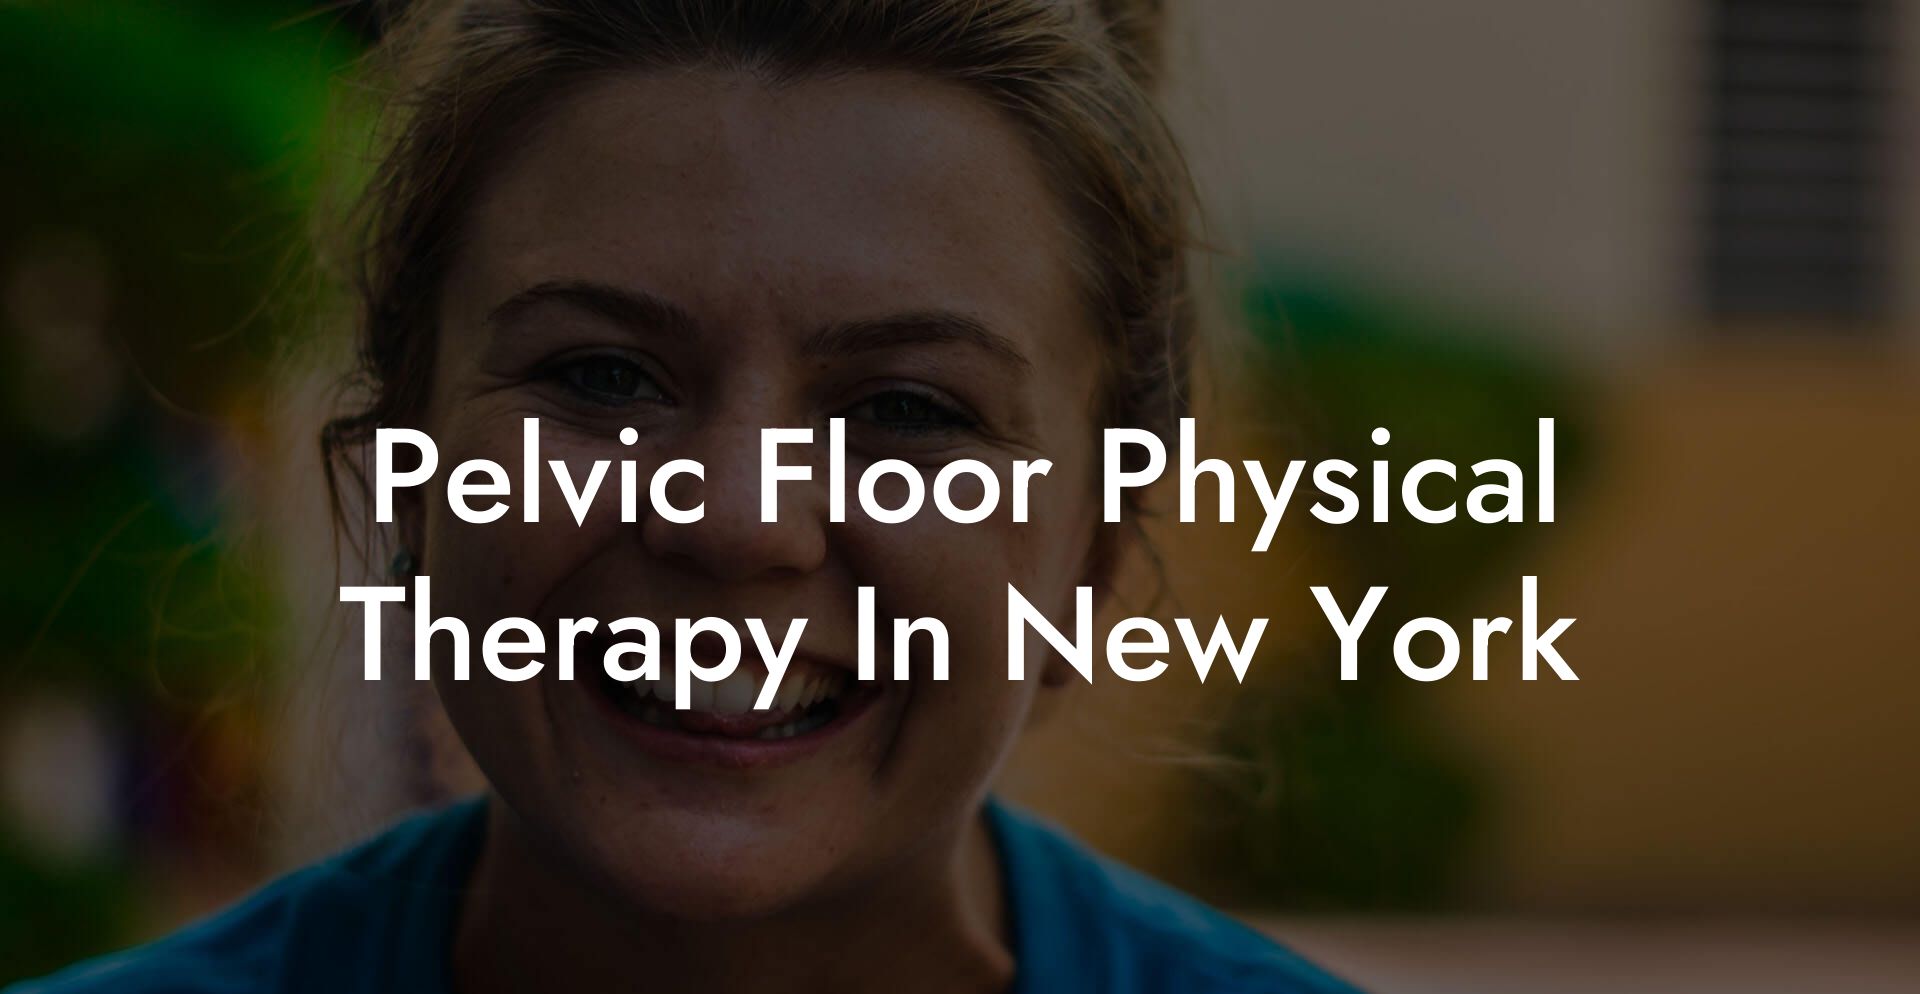 Pelvic Floor Physical Therapy In New York